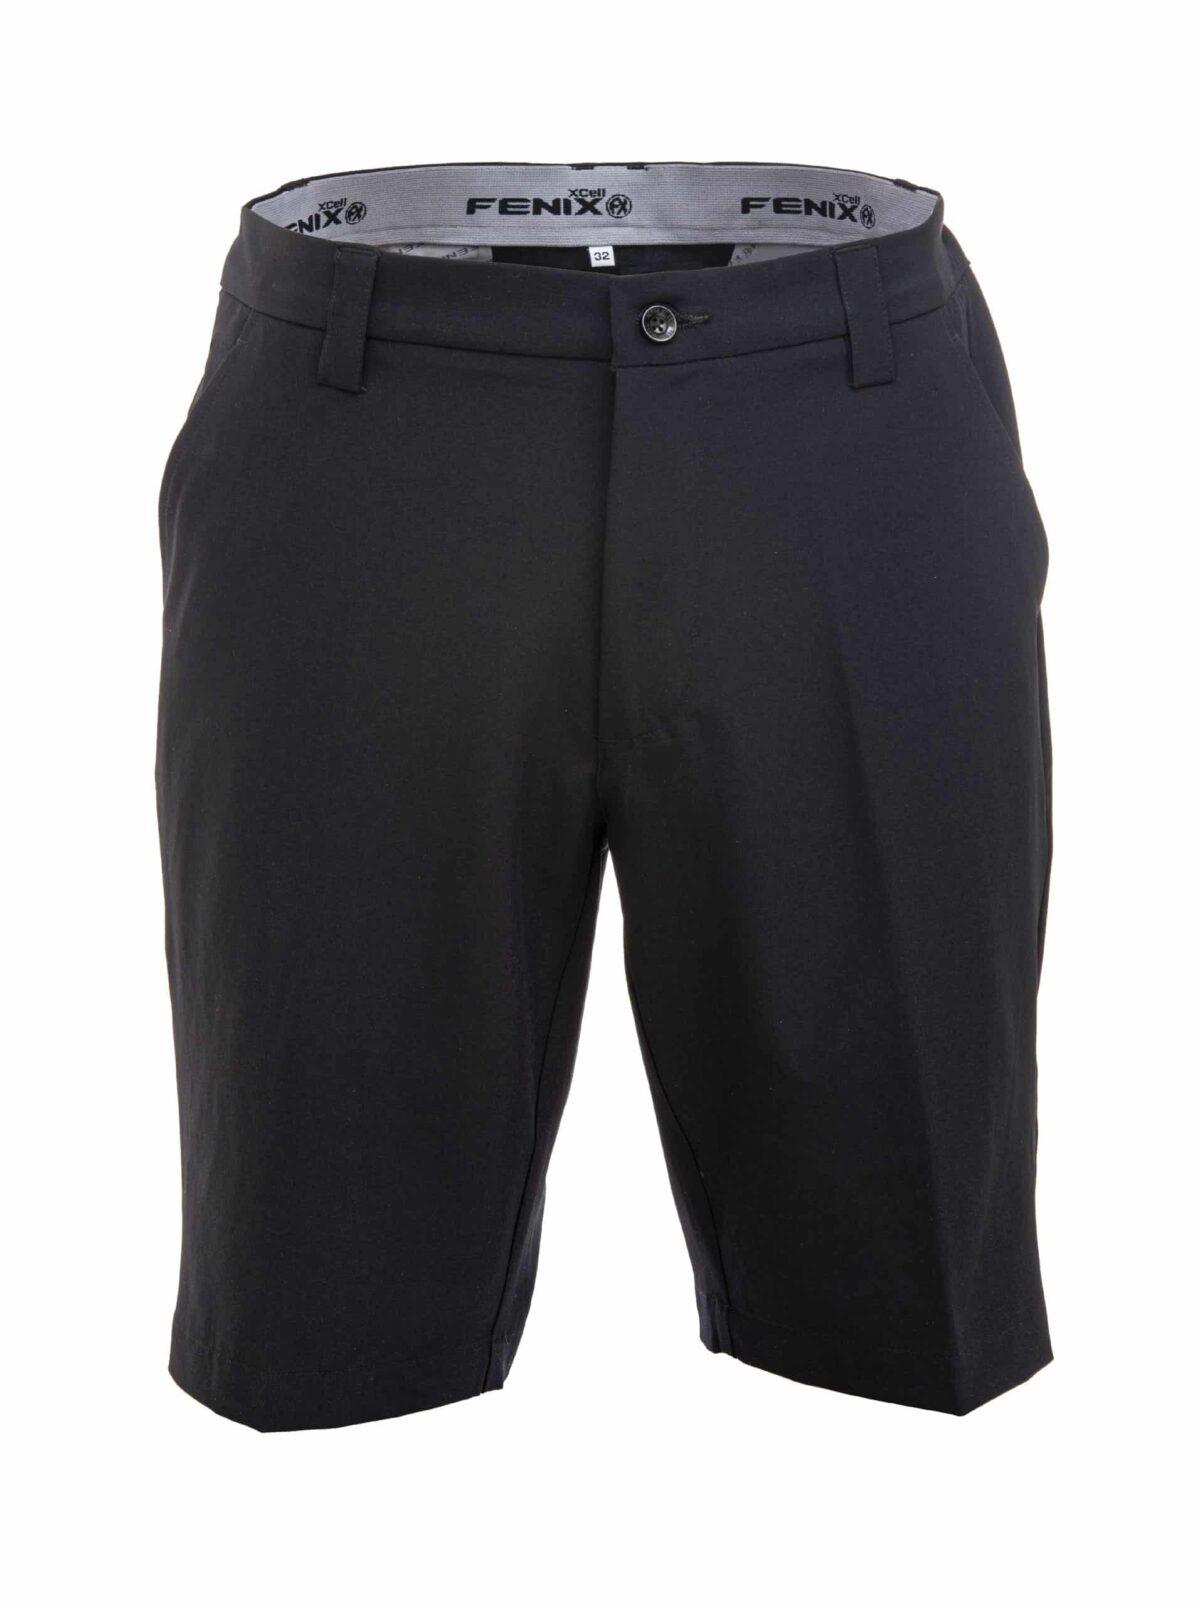 Fenix XCell black golf shorts front view